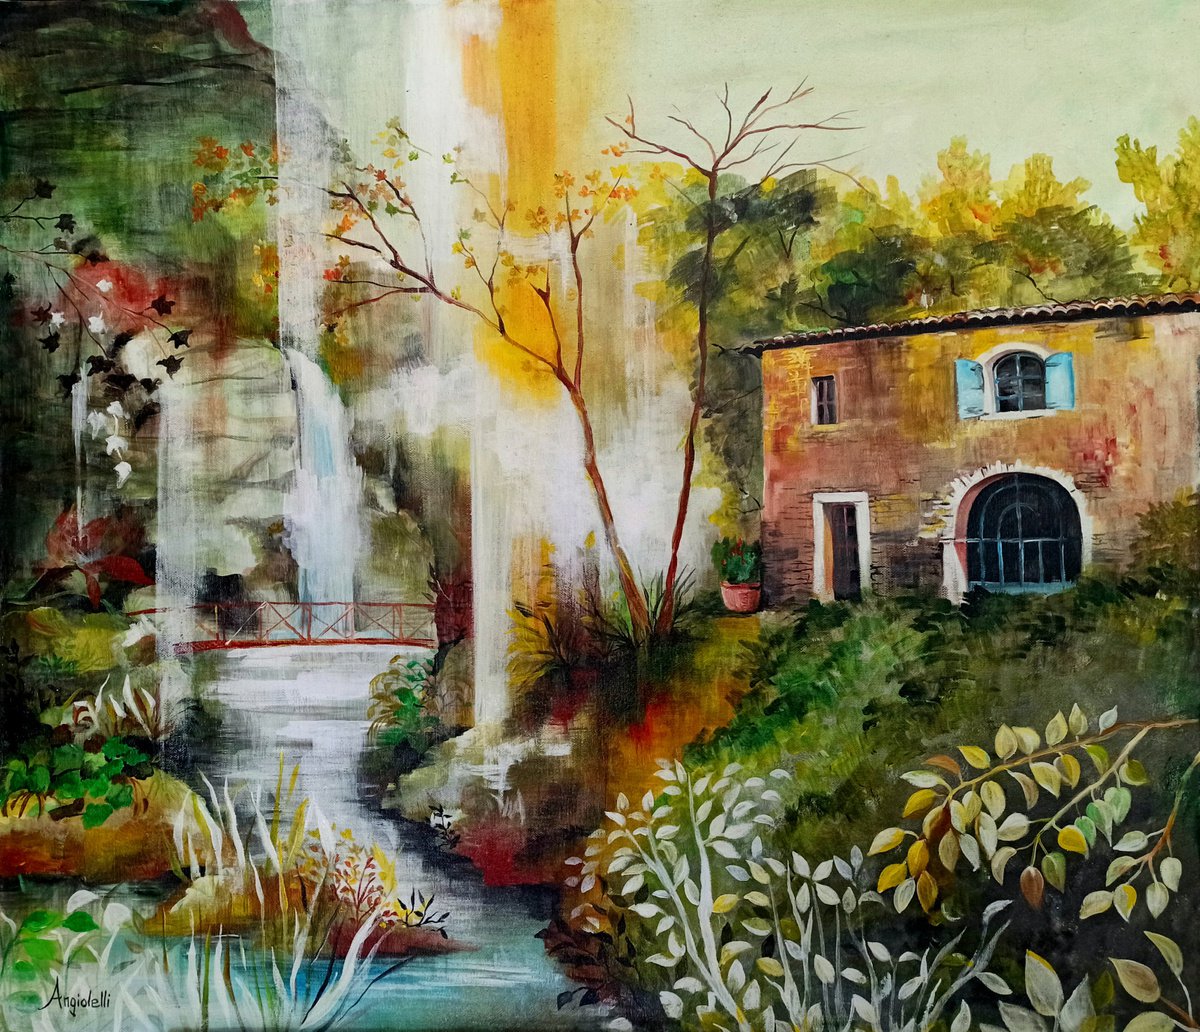 The house on the waterfall - landscape - original painting by Anna Rita Angiolelli